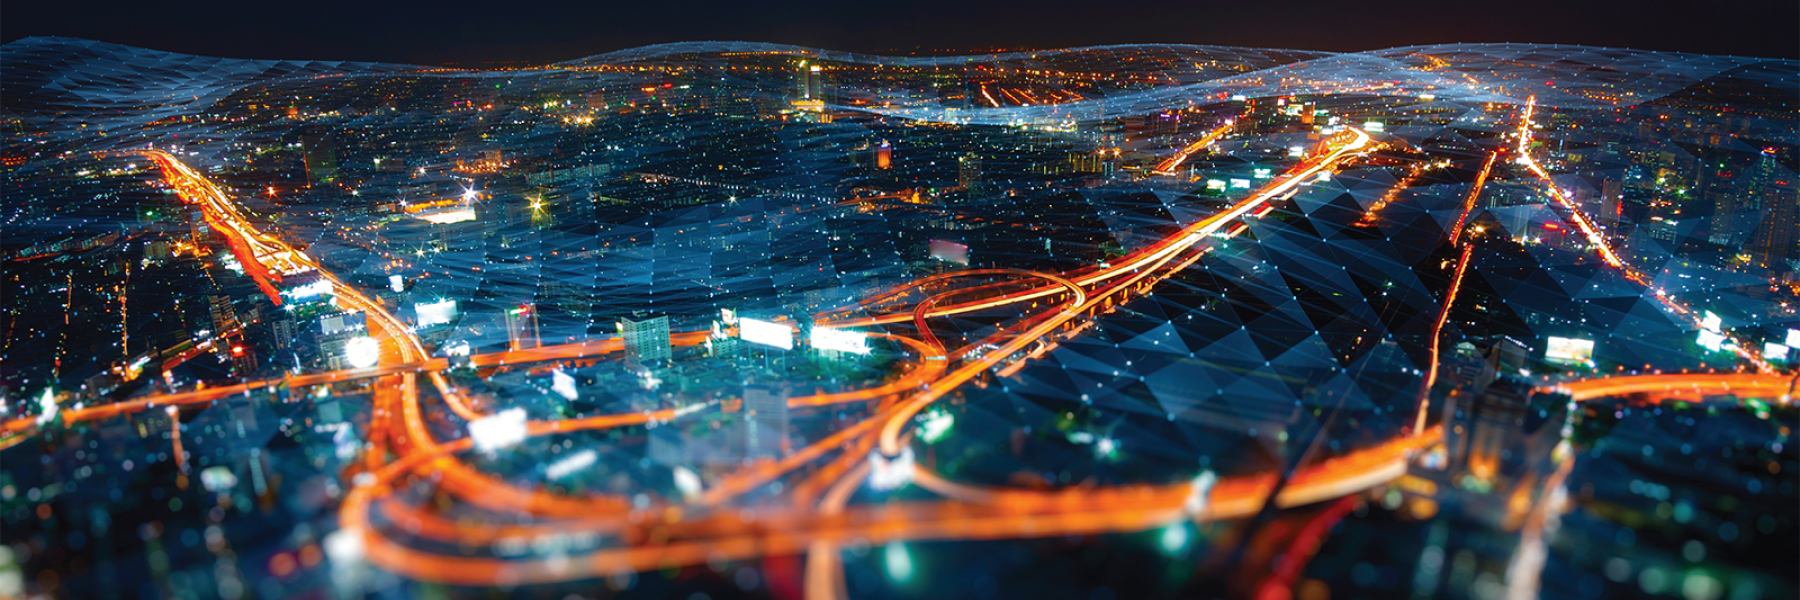 Aerial view of city at night with glowing network and communication lines